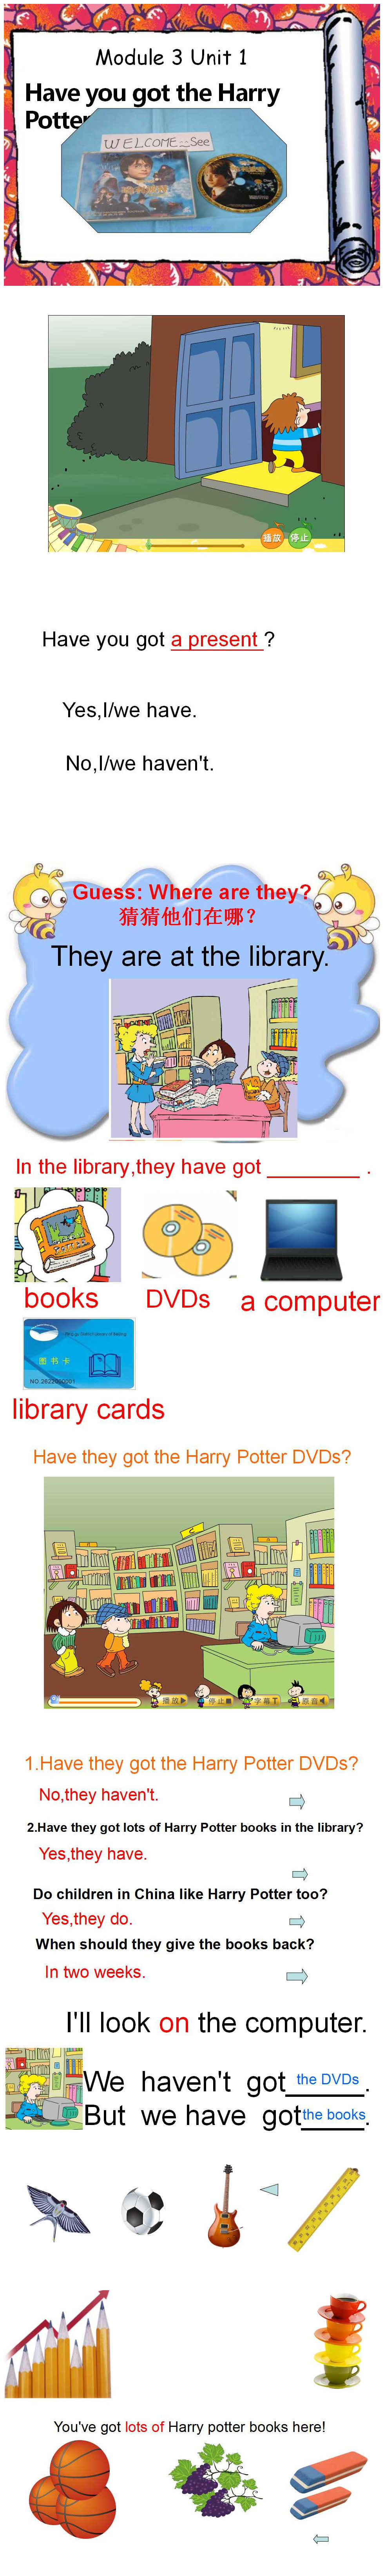 《Have you got the Harry Potter videos?》PPT课件3